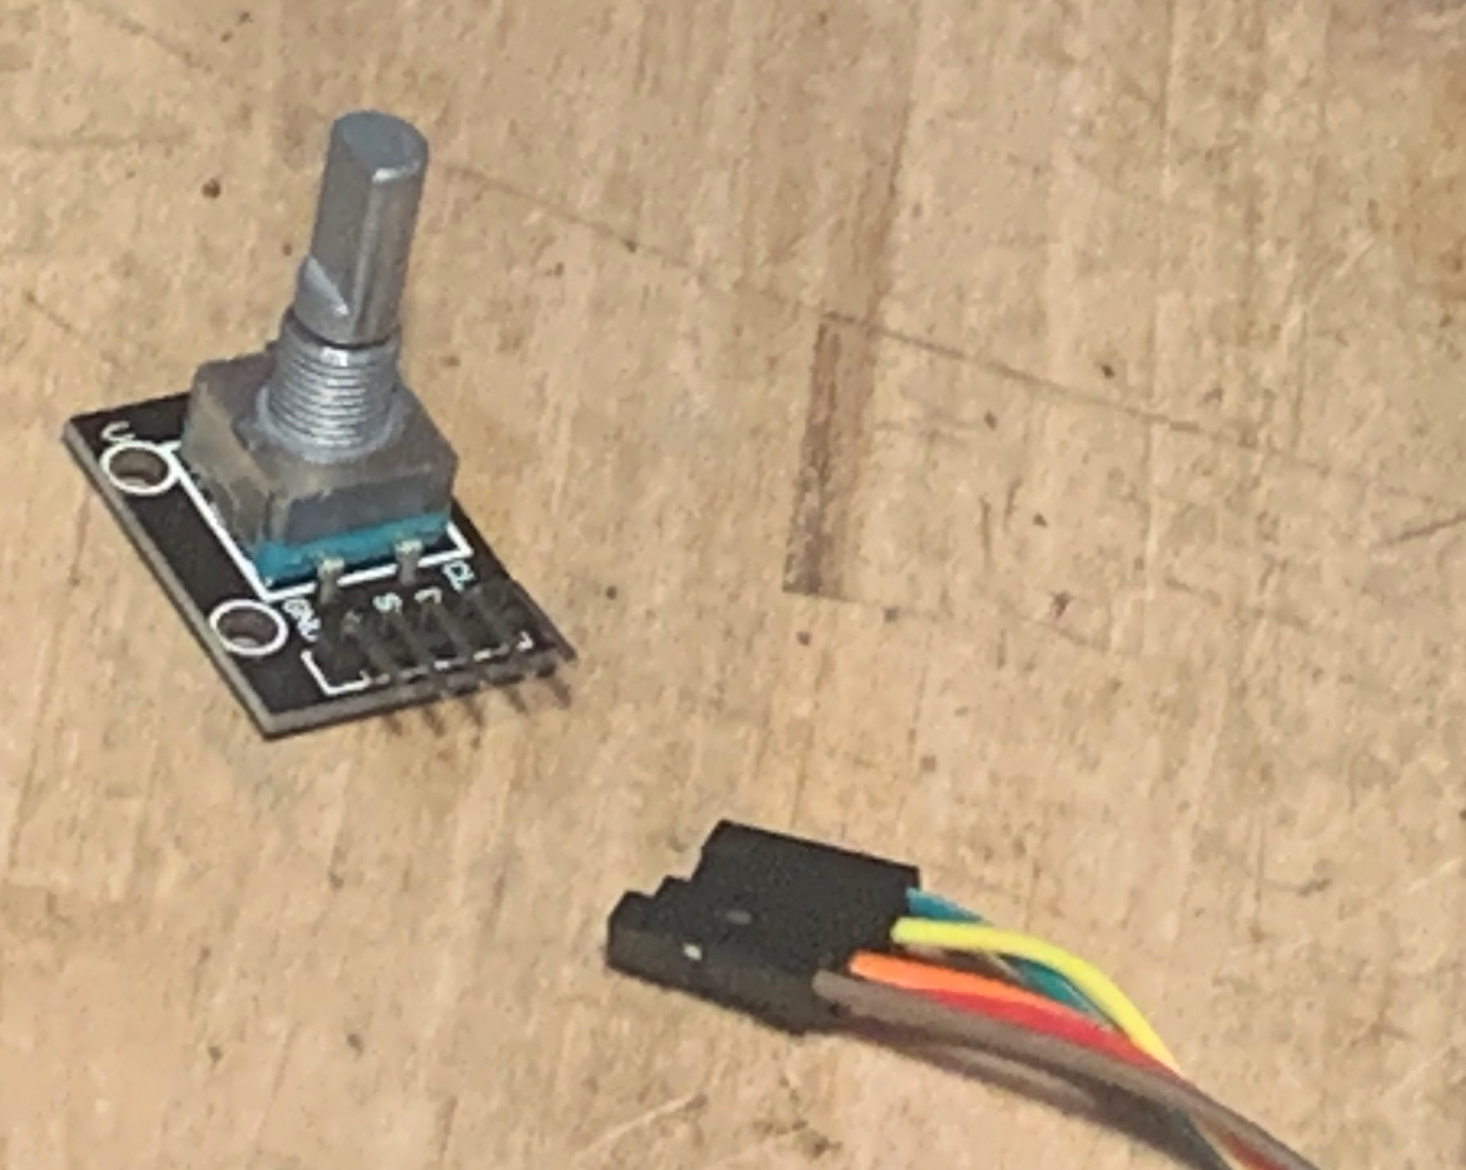 Step 5 - Connecting the Rotary Encoder/Decoder